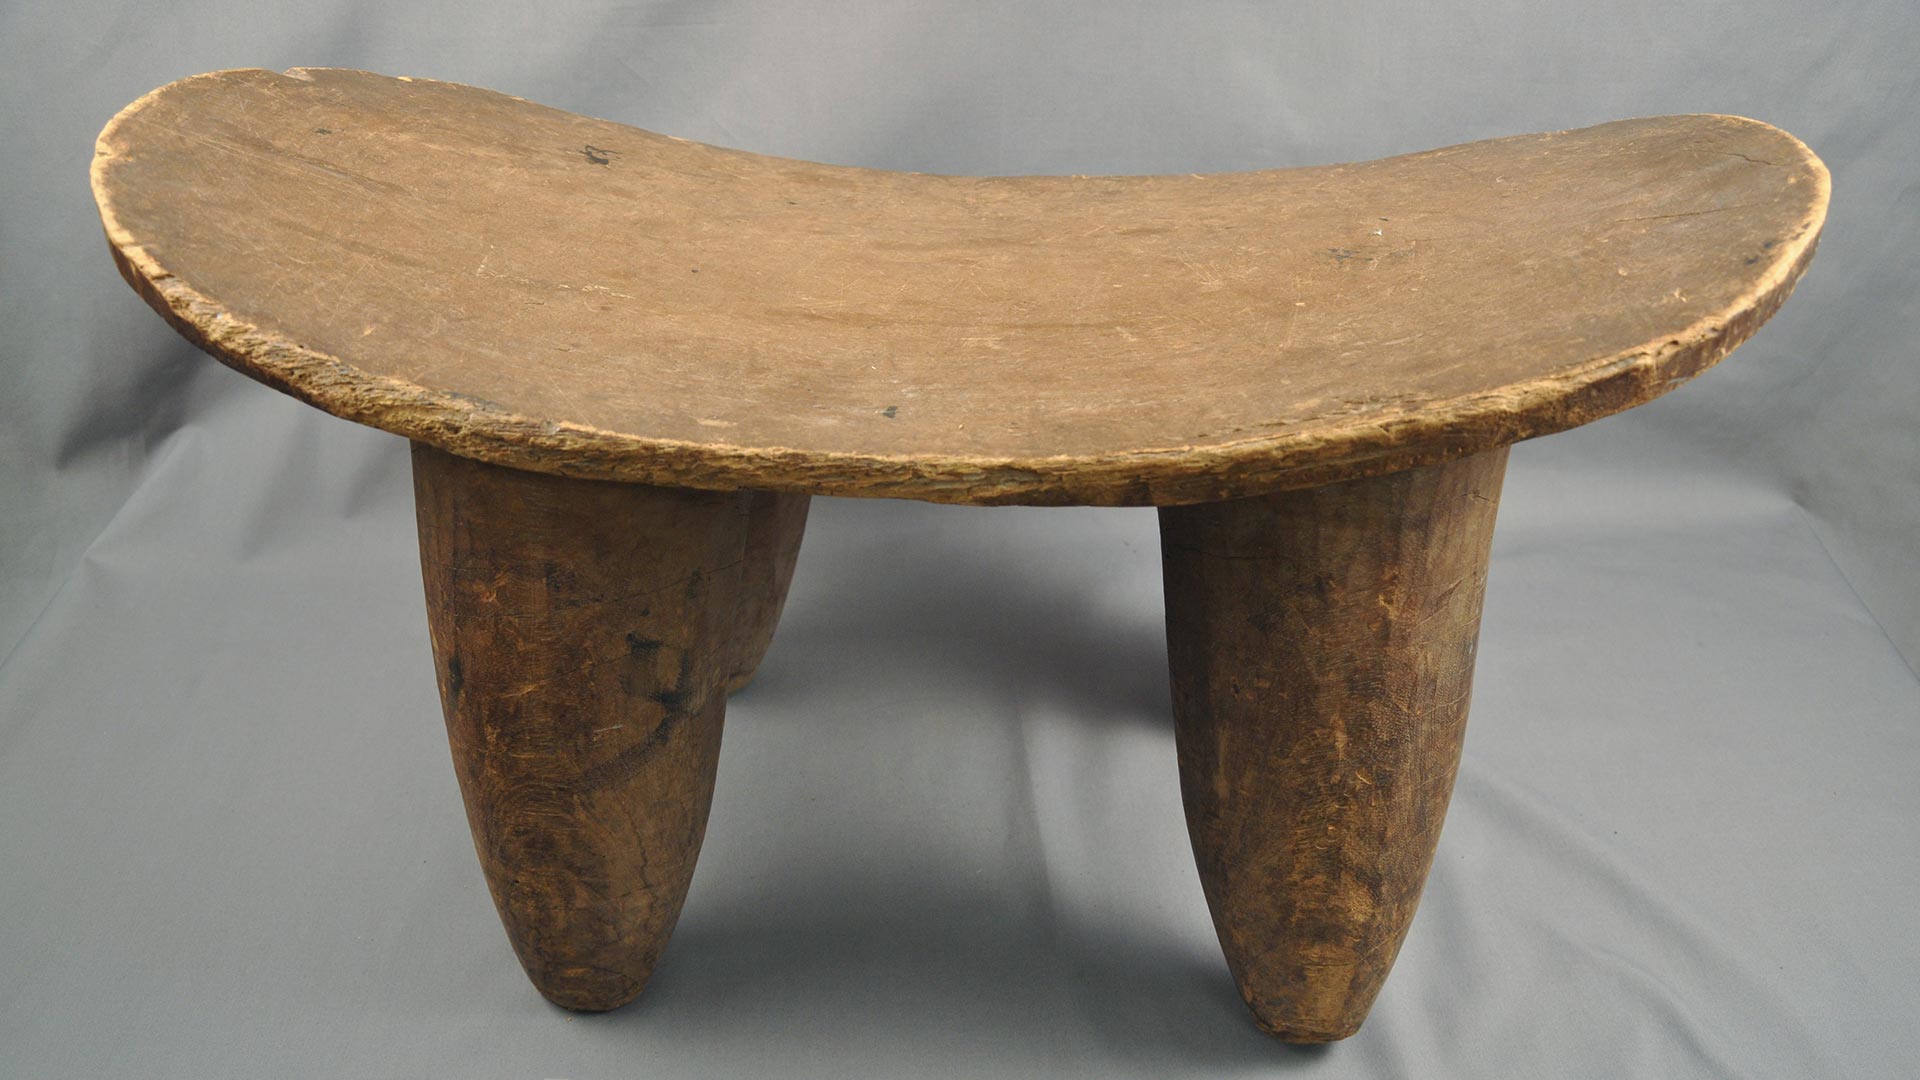 Wooden stool with 4 tapered legs and a slightly curved flat seat